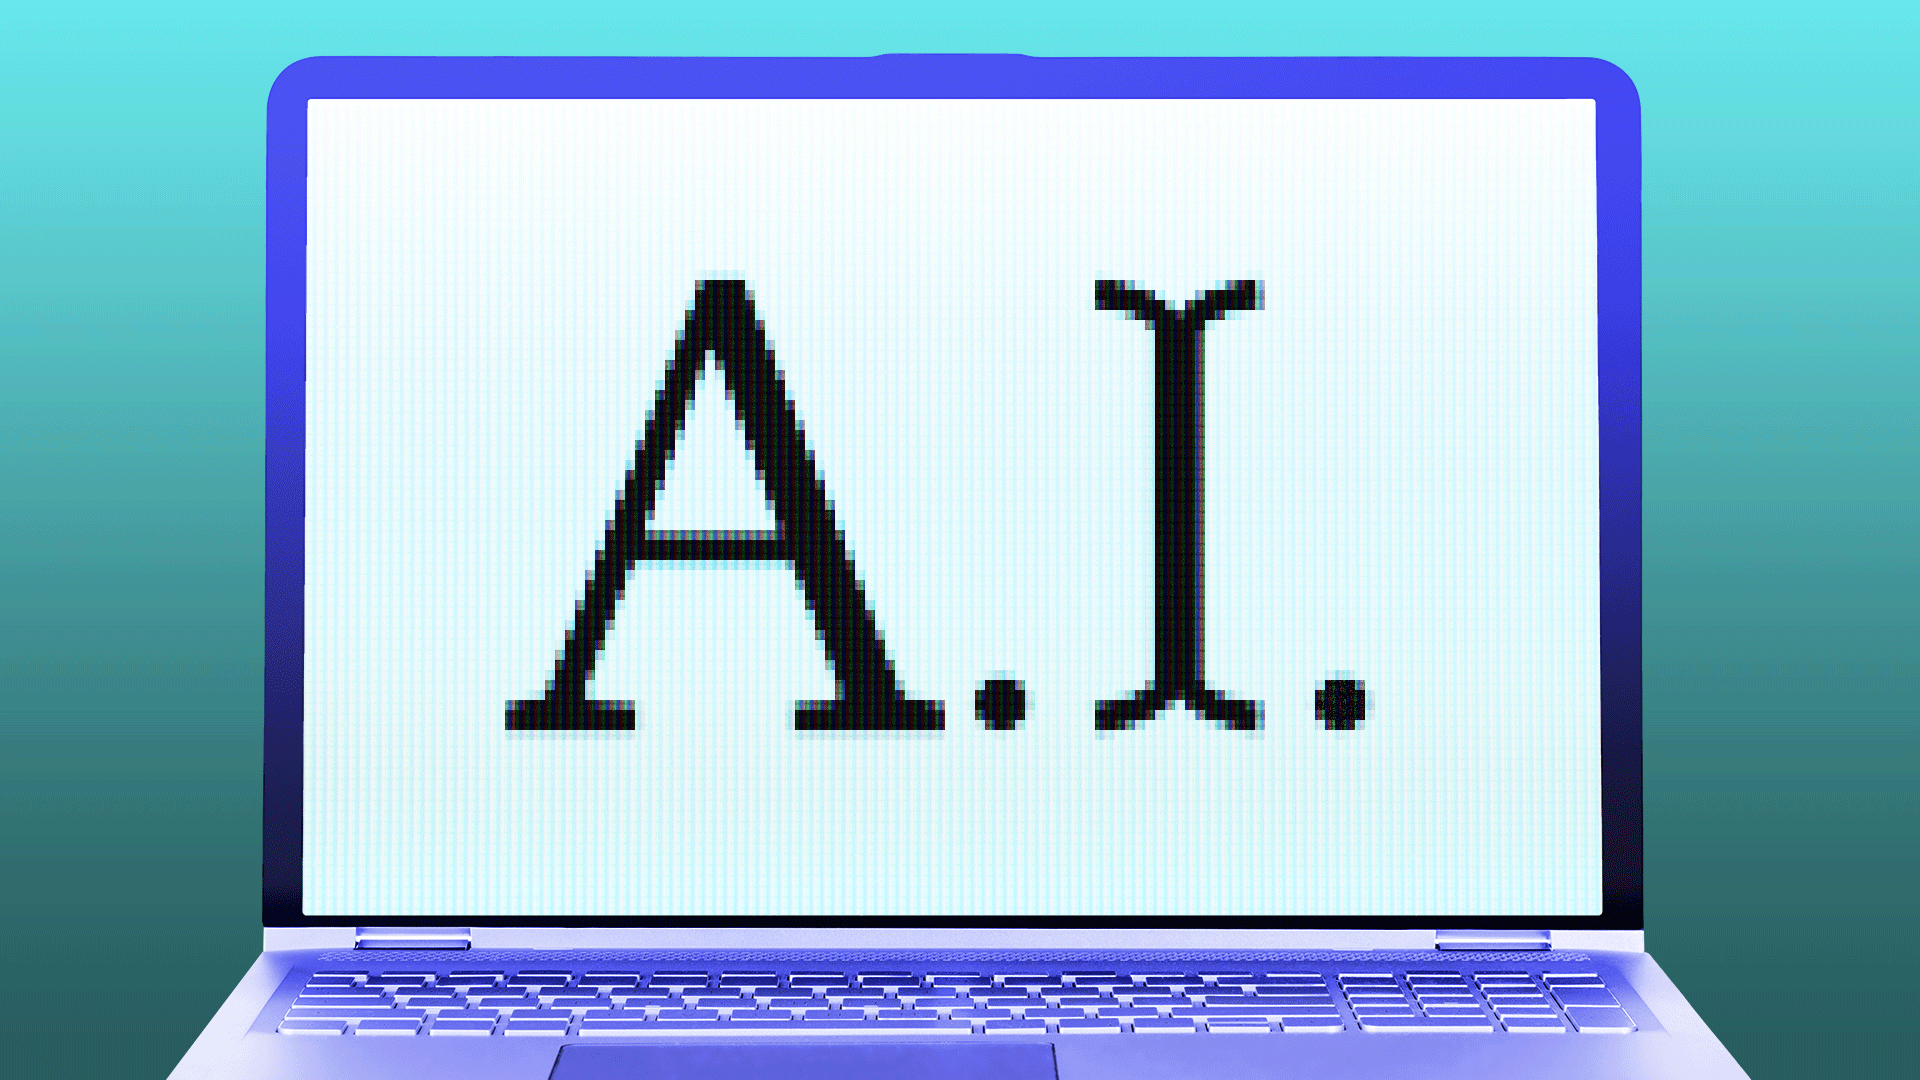 Meet The AIs That Can Write and Code